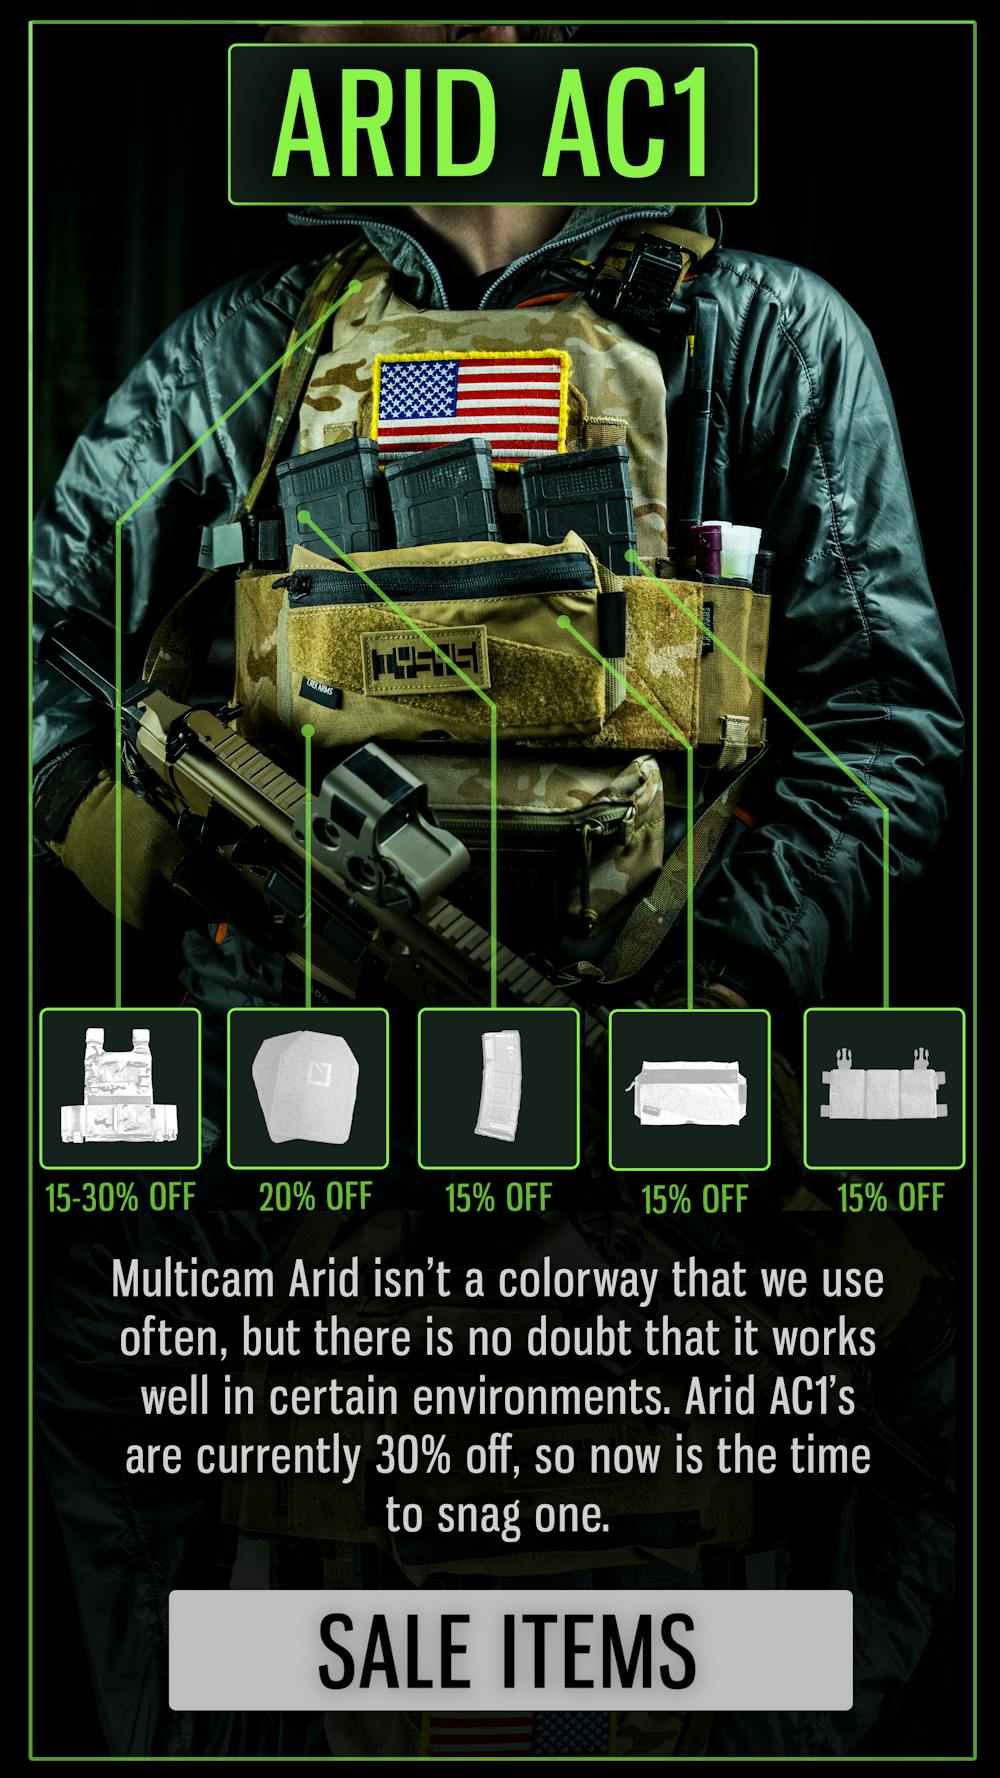 ARID AC1

Multicam Arid isn't a colorway that we use often, but there is no doubt that it works well in certain environments. Arid AC1's are currently 30% off, so now is the time to snag one.

SALE ITEMS